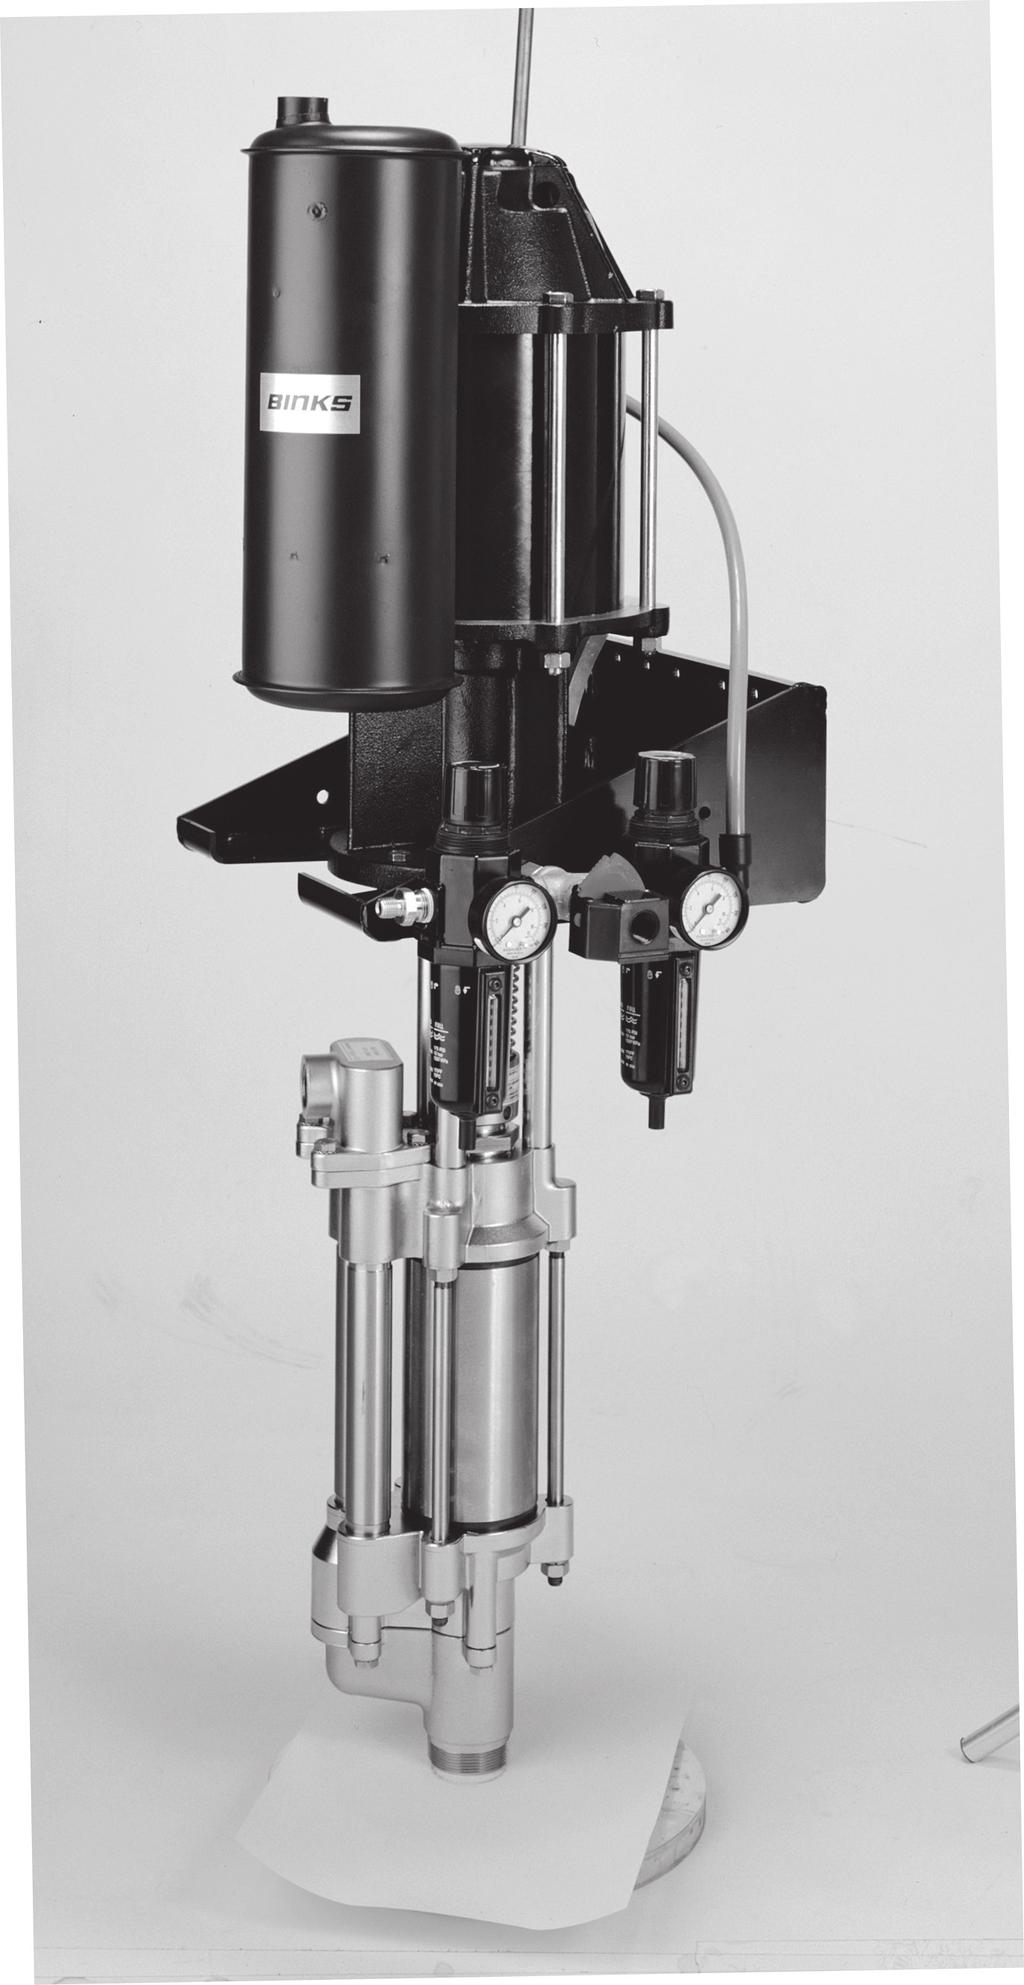 Infinity Four-Ball Pump Package The All-Stainless Pump Built to Take on the Toughest Applications Ceramic UltraCoat on Cylinder and Rod Package Includes Pump Muffler Accessories (Included) Wall Mount